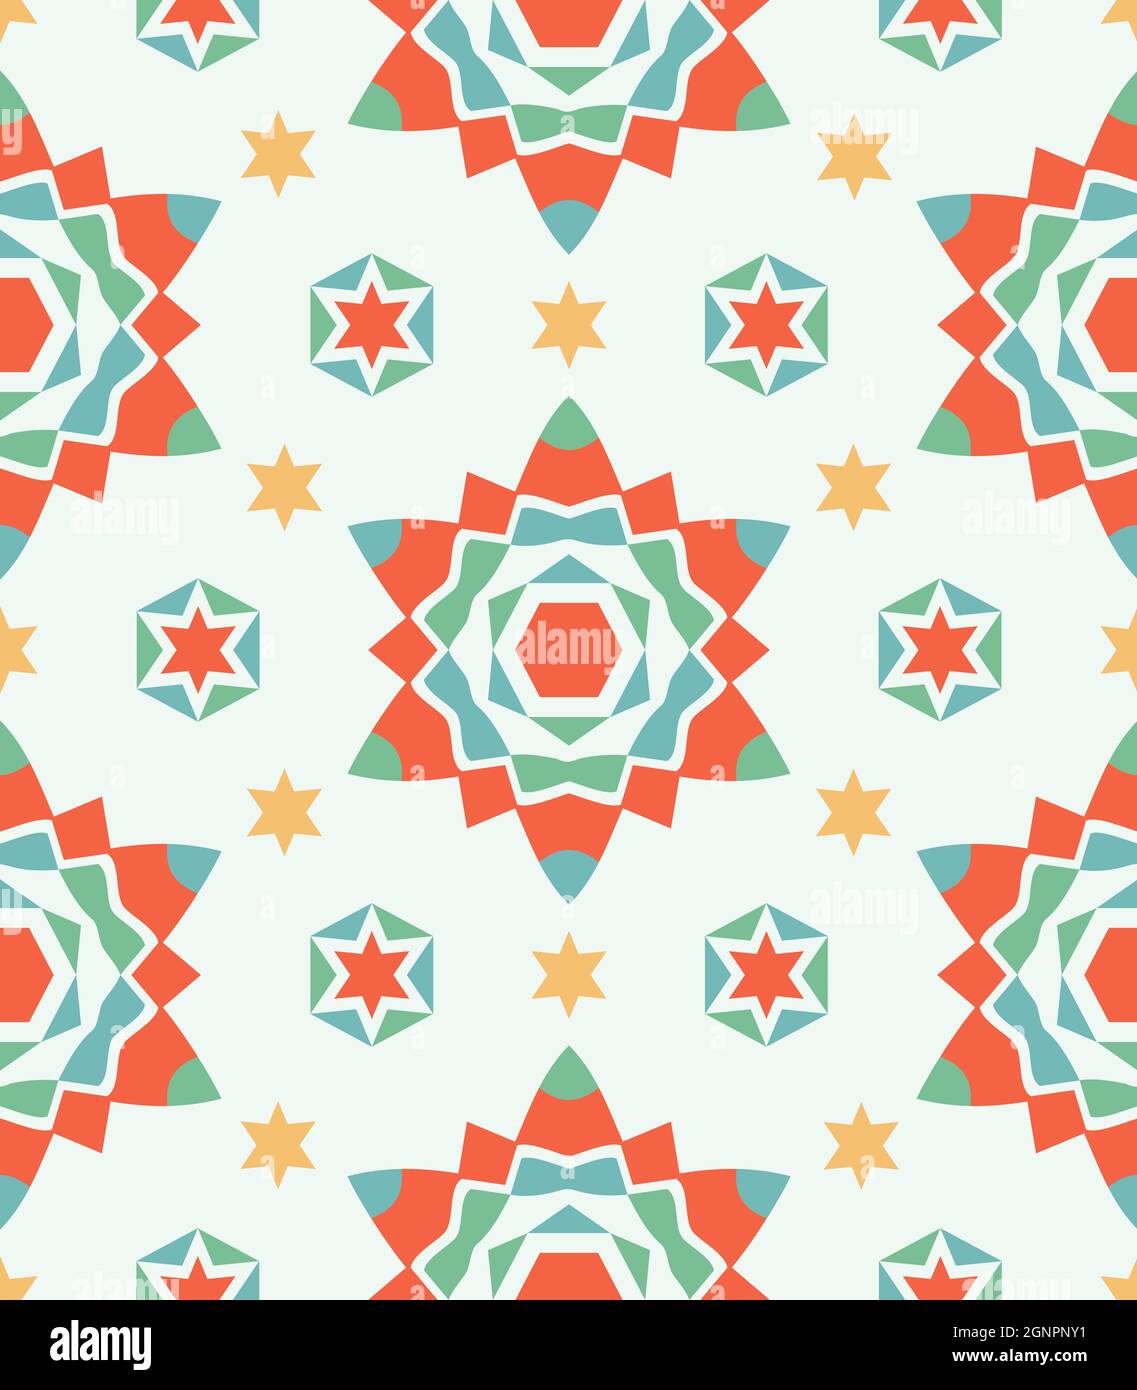 Seamless pattern with Folk Motifs in 5 colors Stock Photo - Alamy